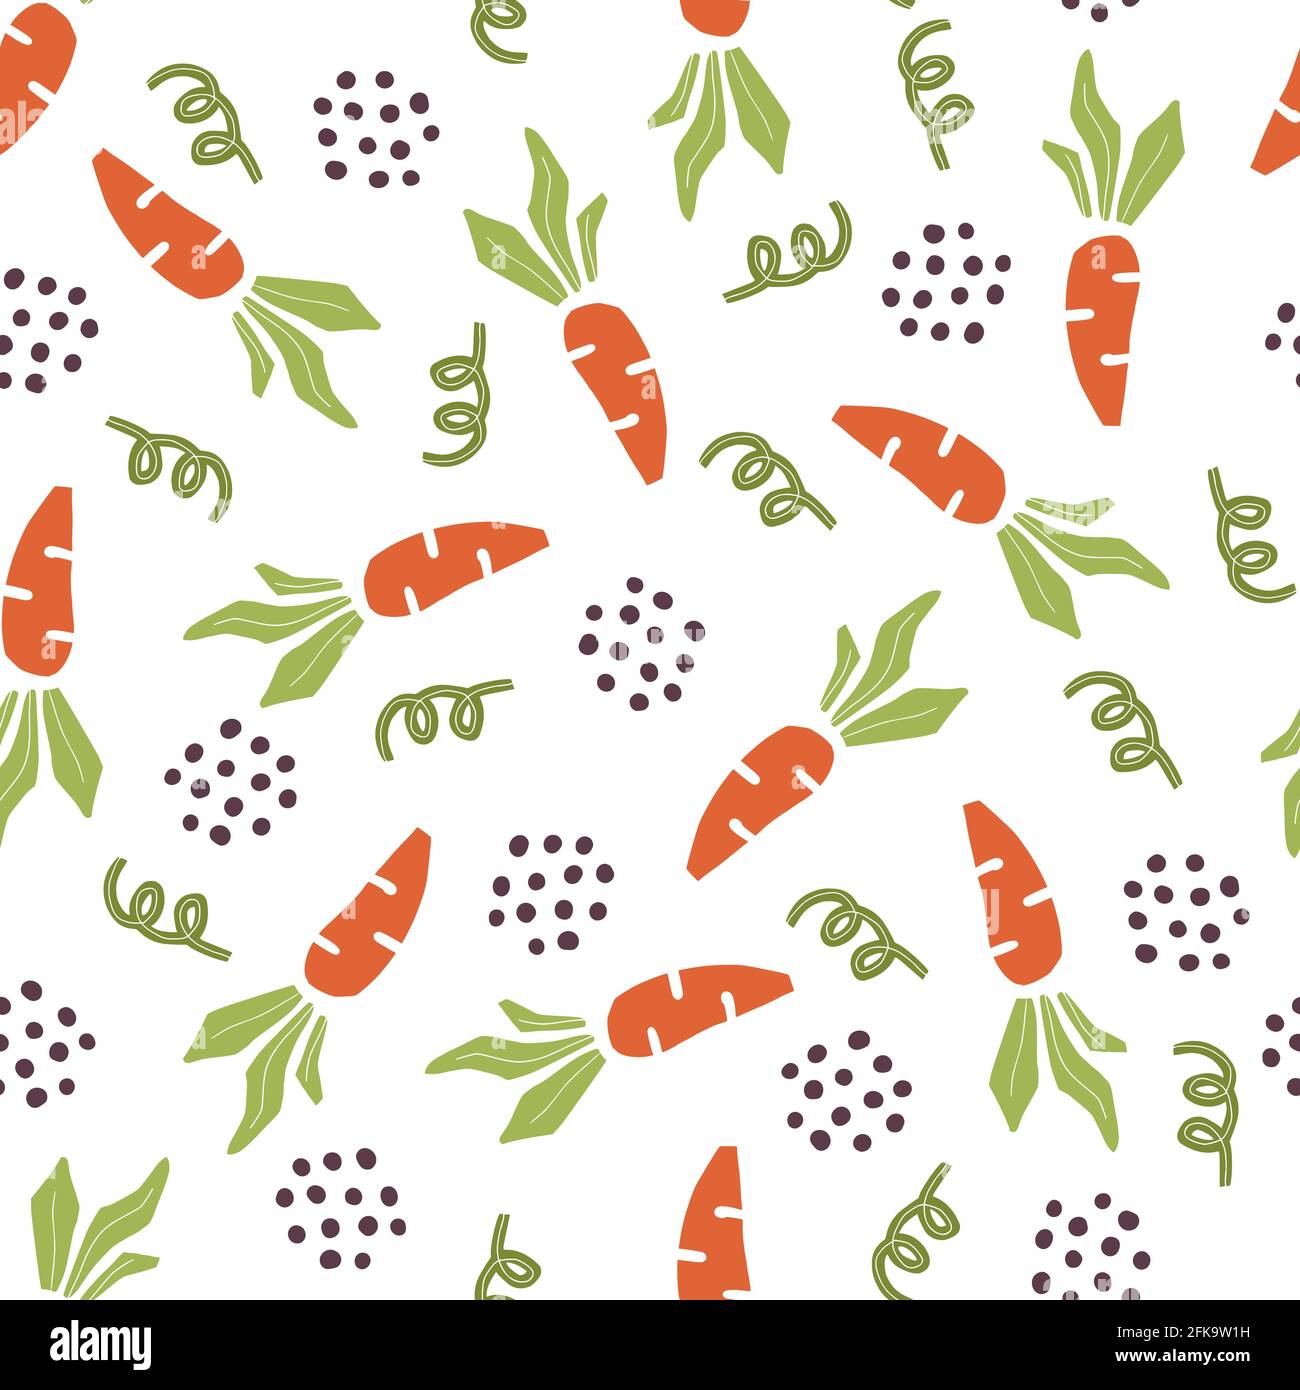 Hand drawn seamless pattern of simple carrot. Doodle sketch style. Carrot pattern for food shop, vegetable wallpaper, background, textile design Stock Vector